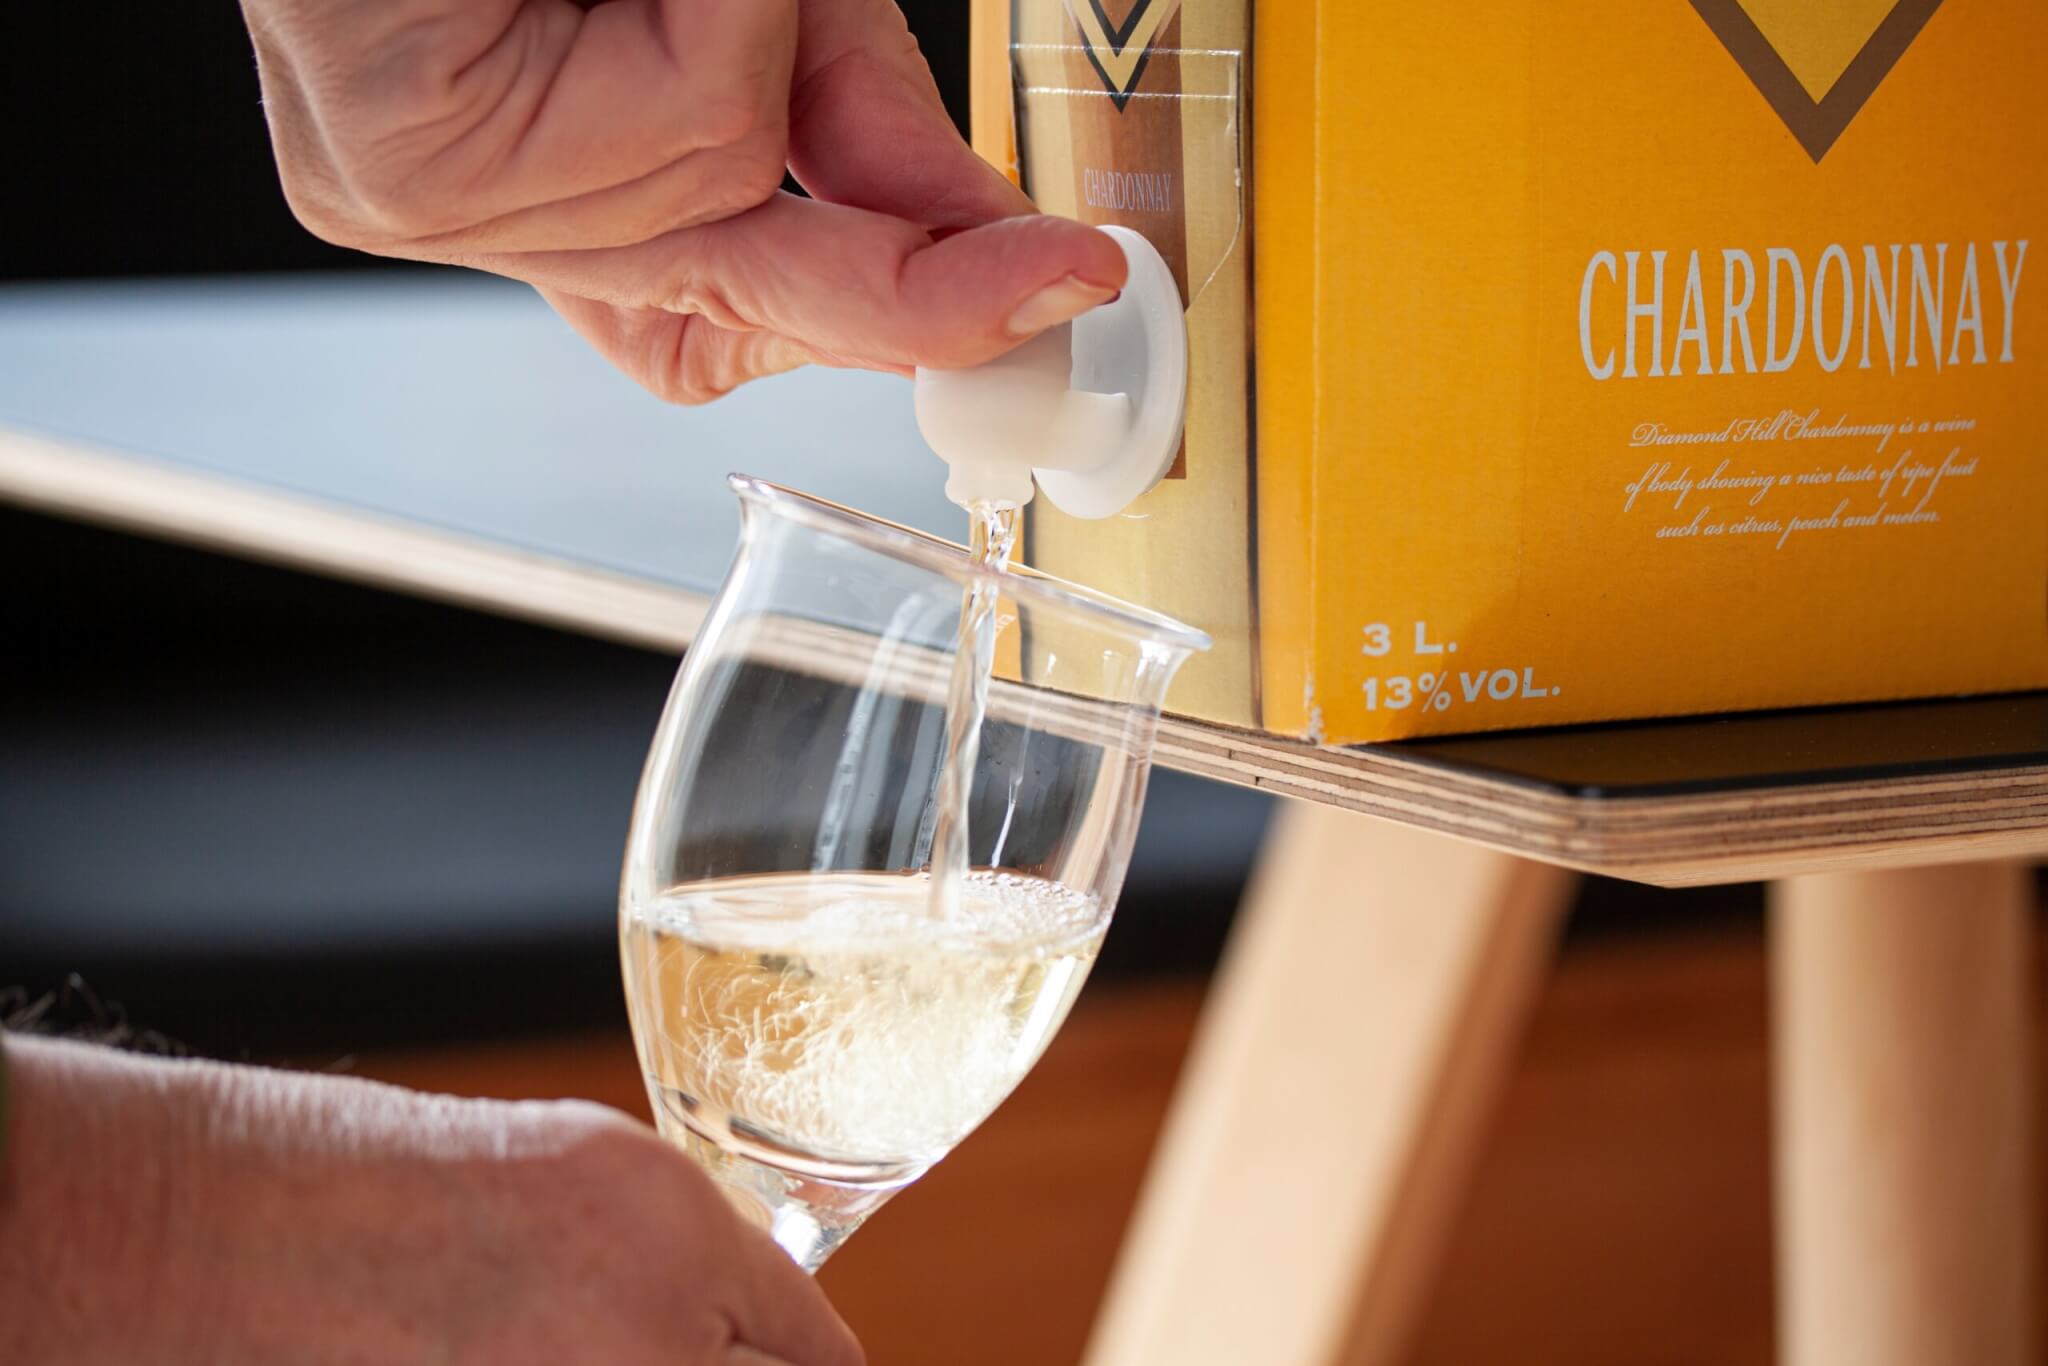 Best Boxed White Wines Top 5 Summertime Blends, According To Experts